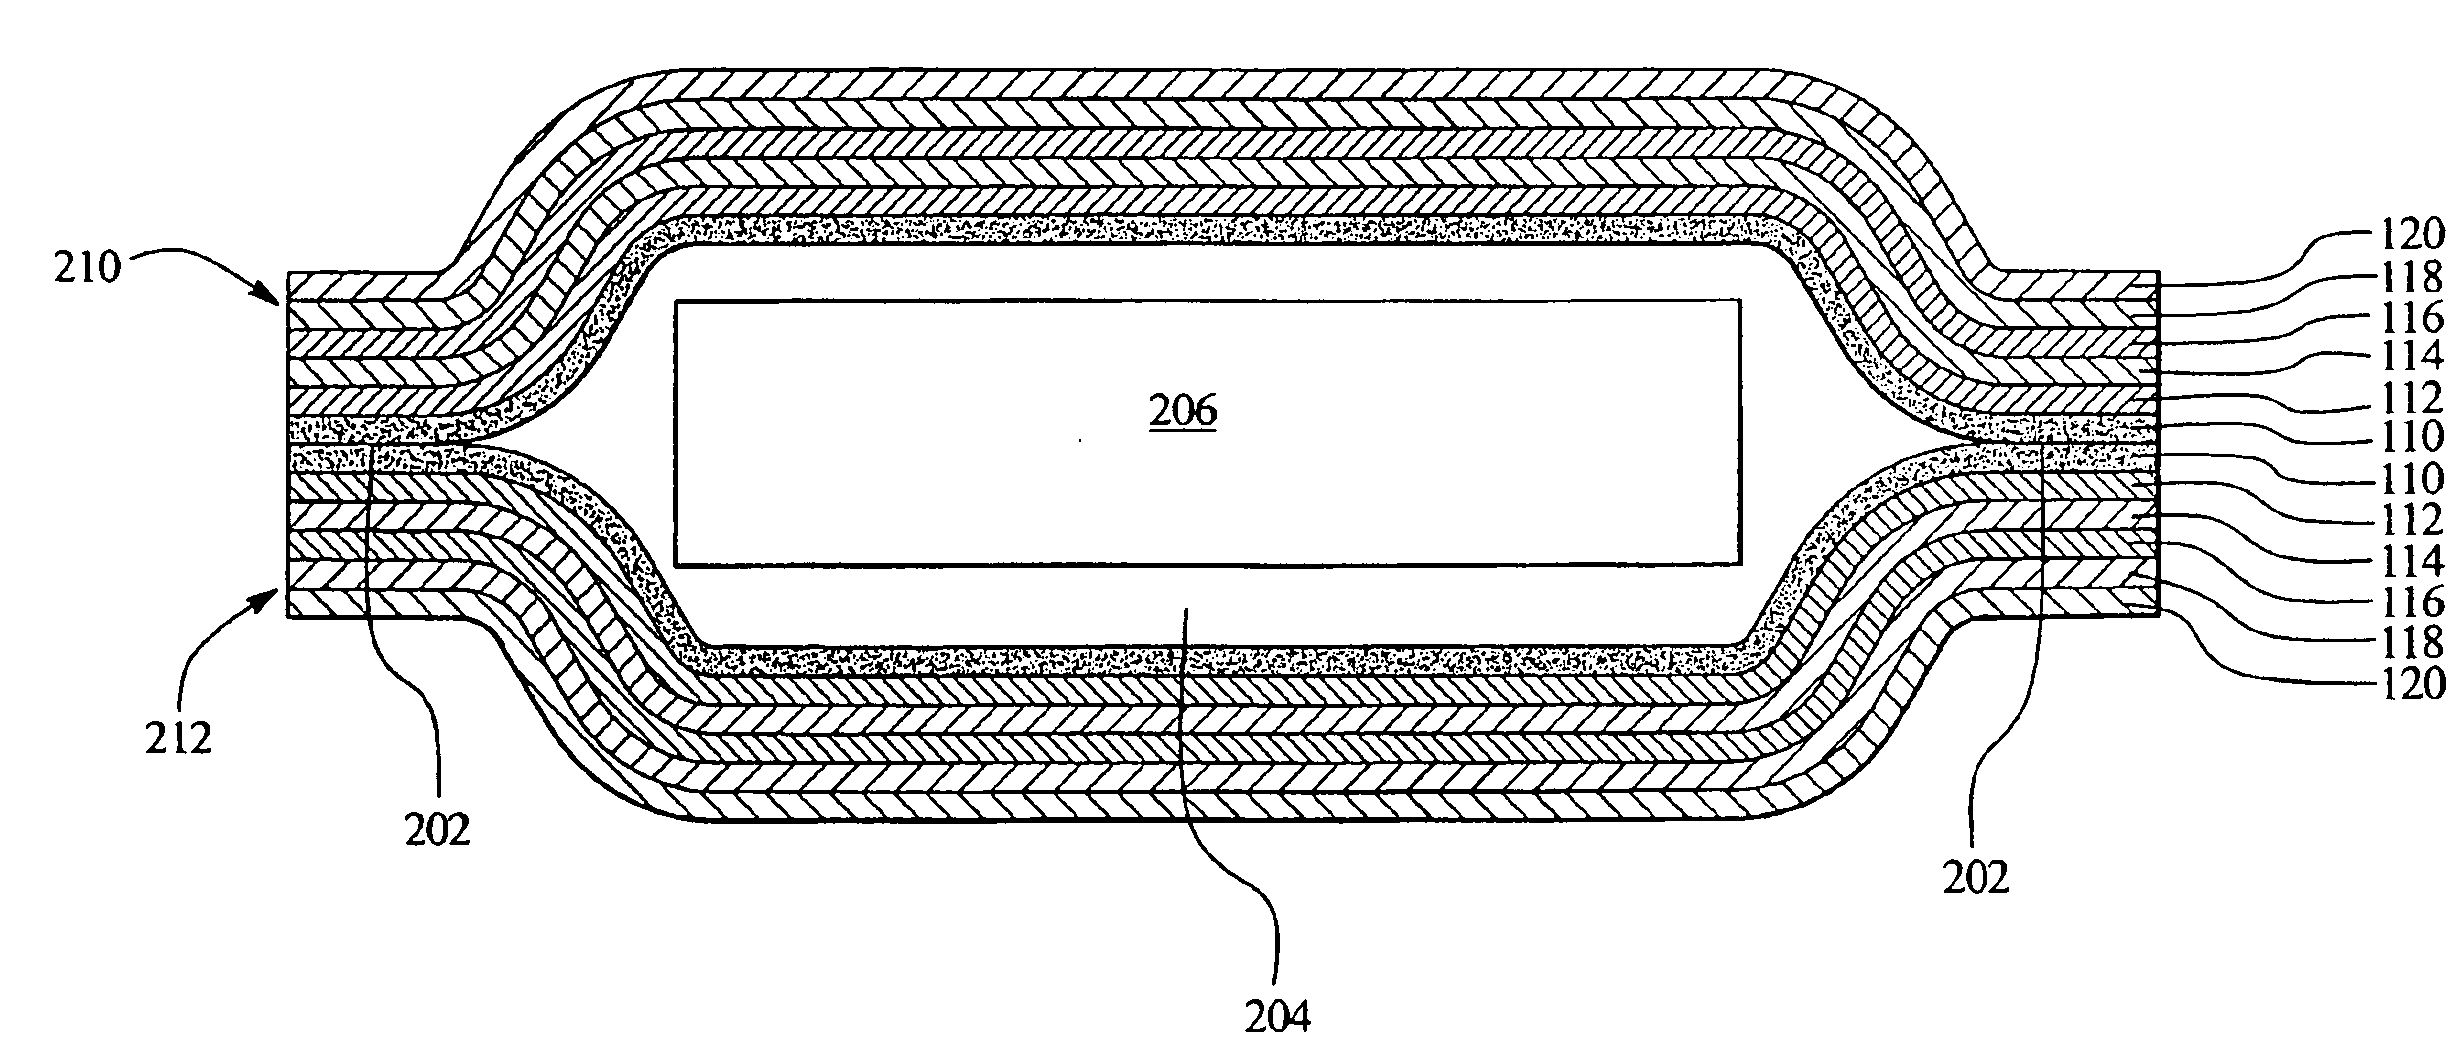 Films having a desiccant material incorporated therein and methods of use and manufacture